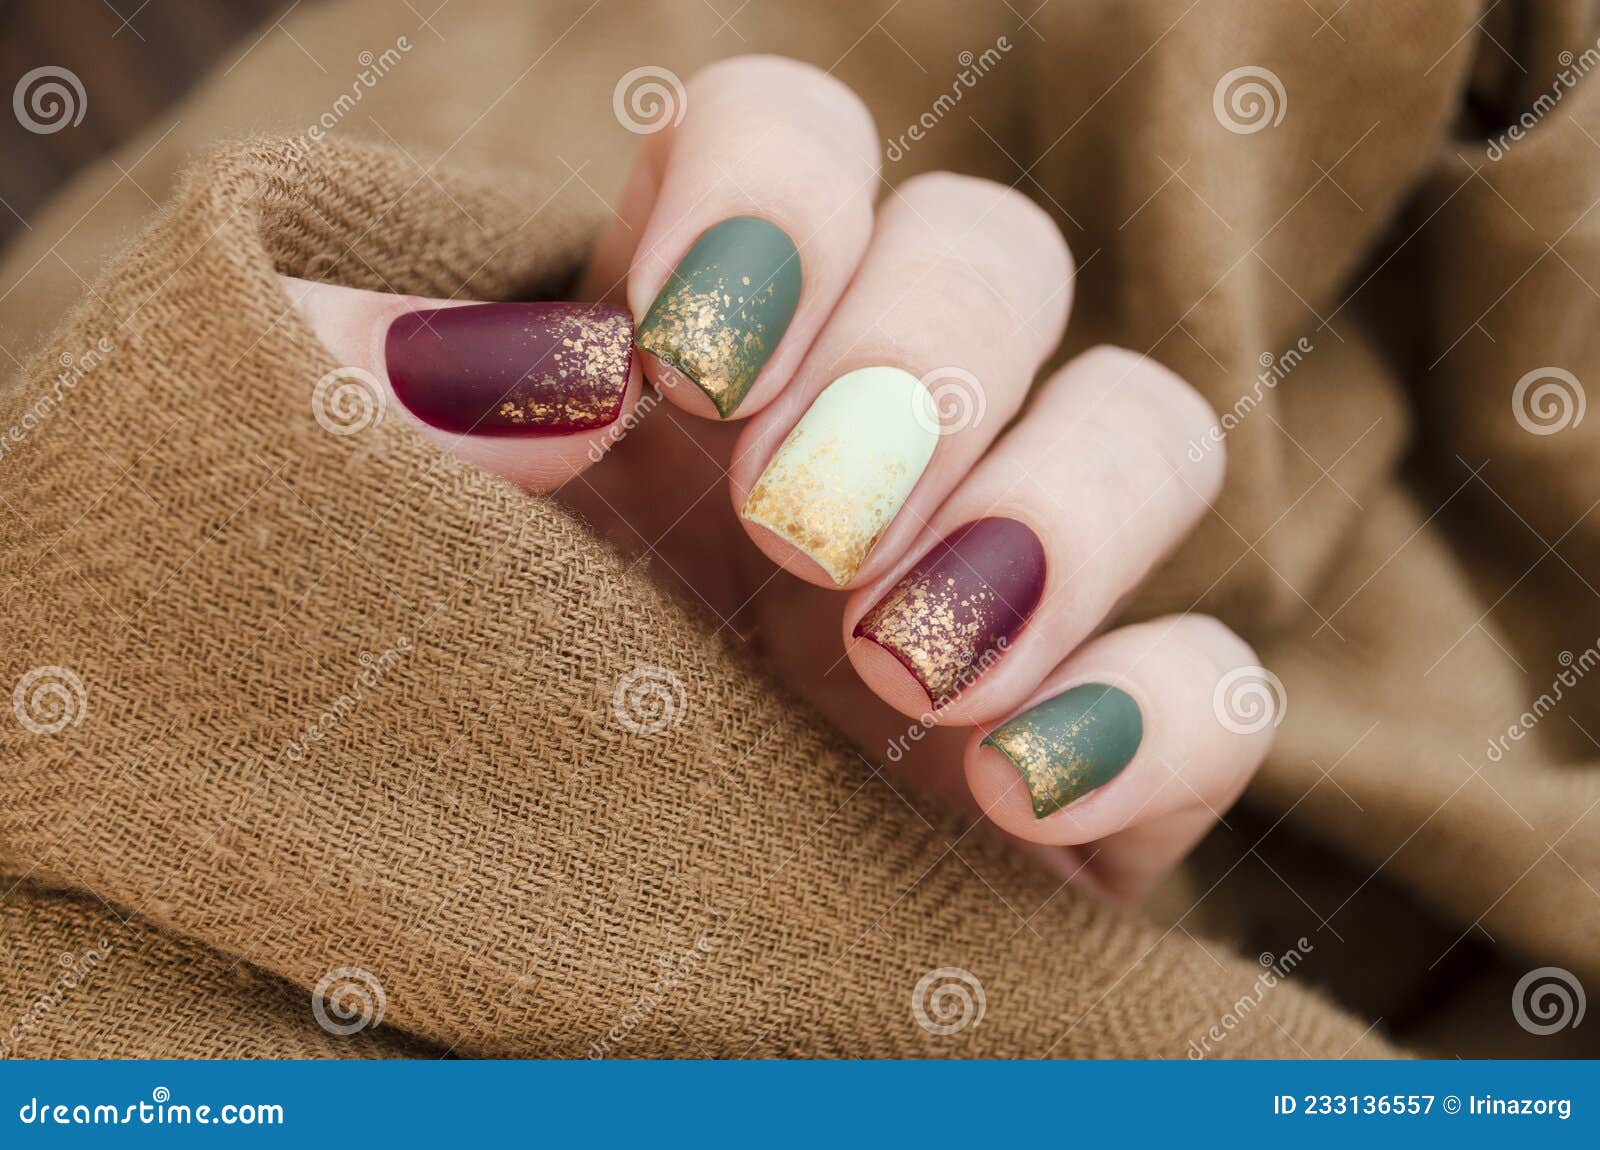 7. Muted Nail Color Images without Watermark - wide 1